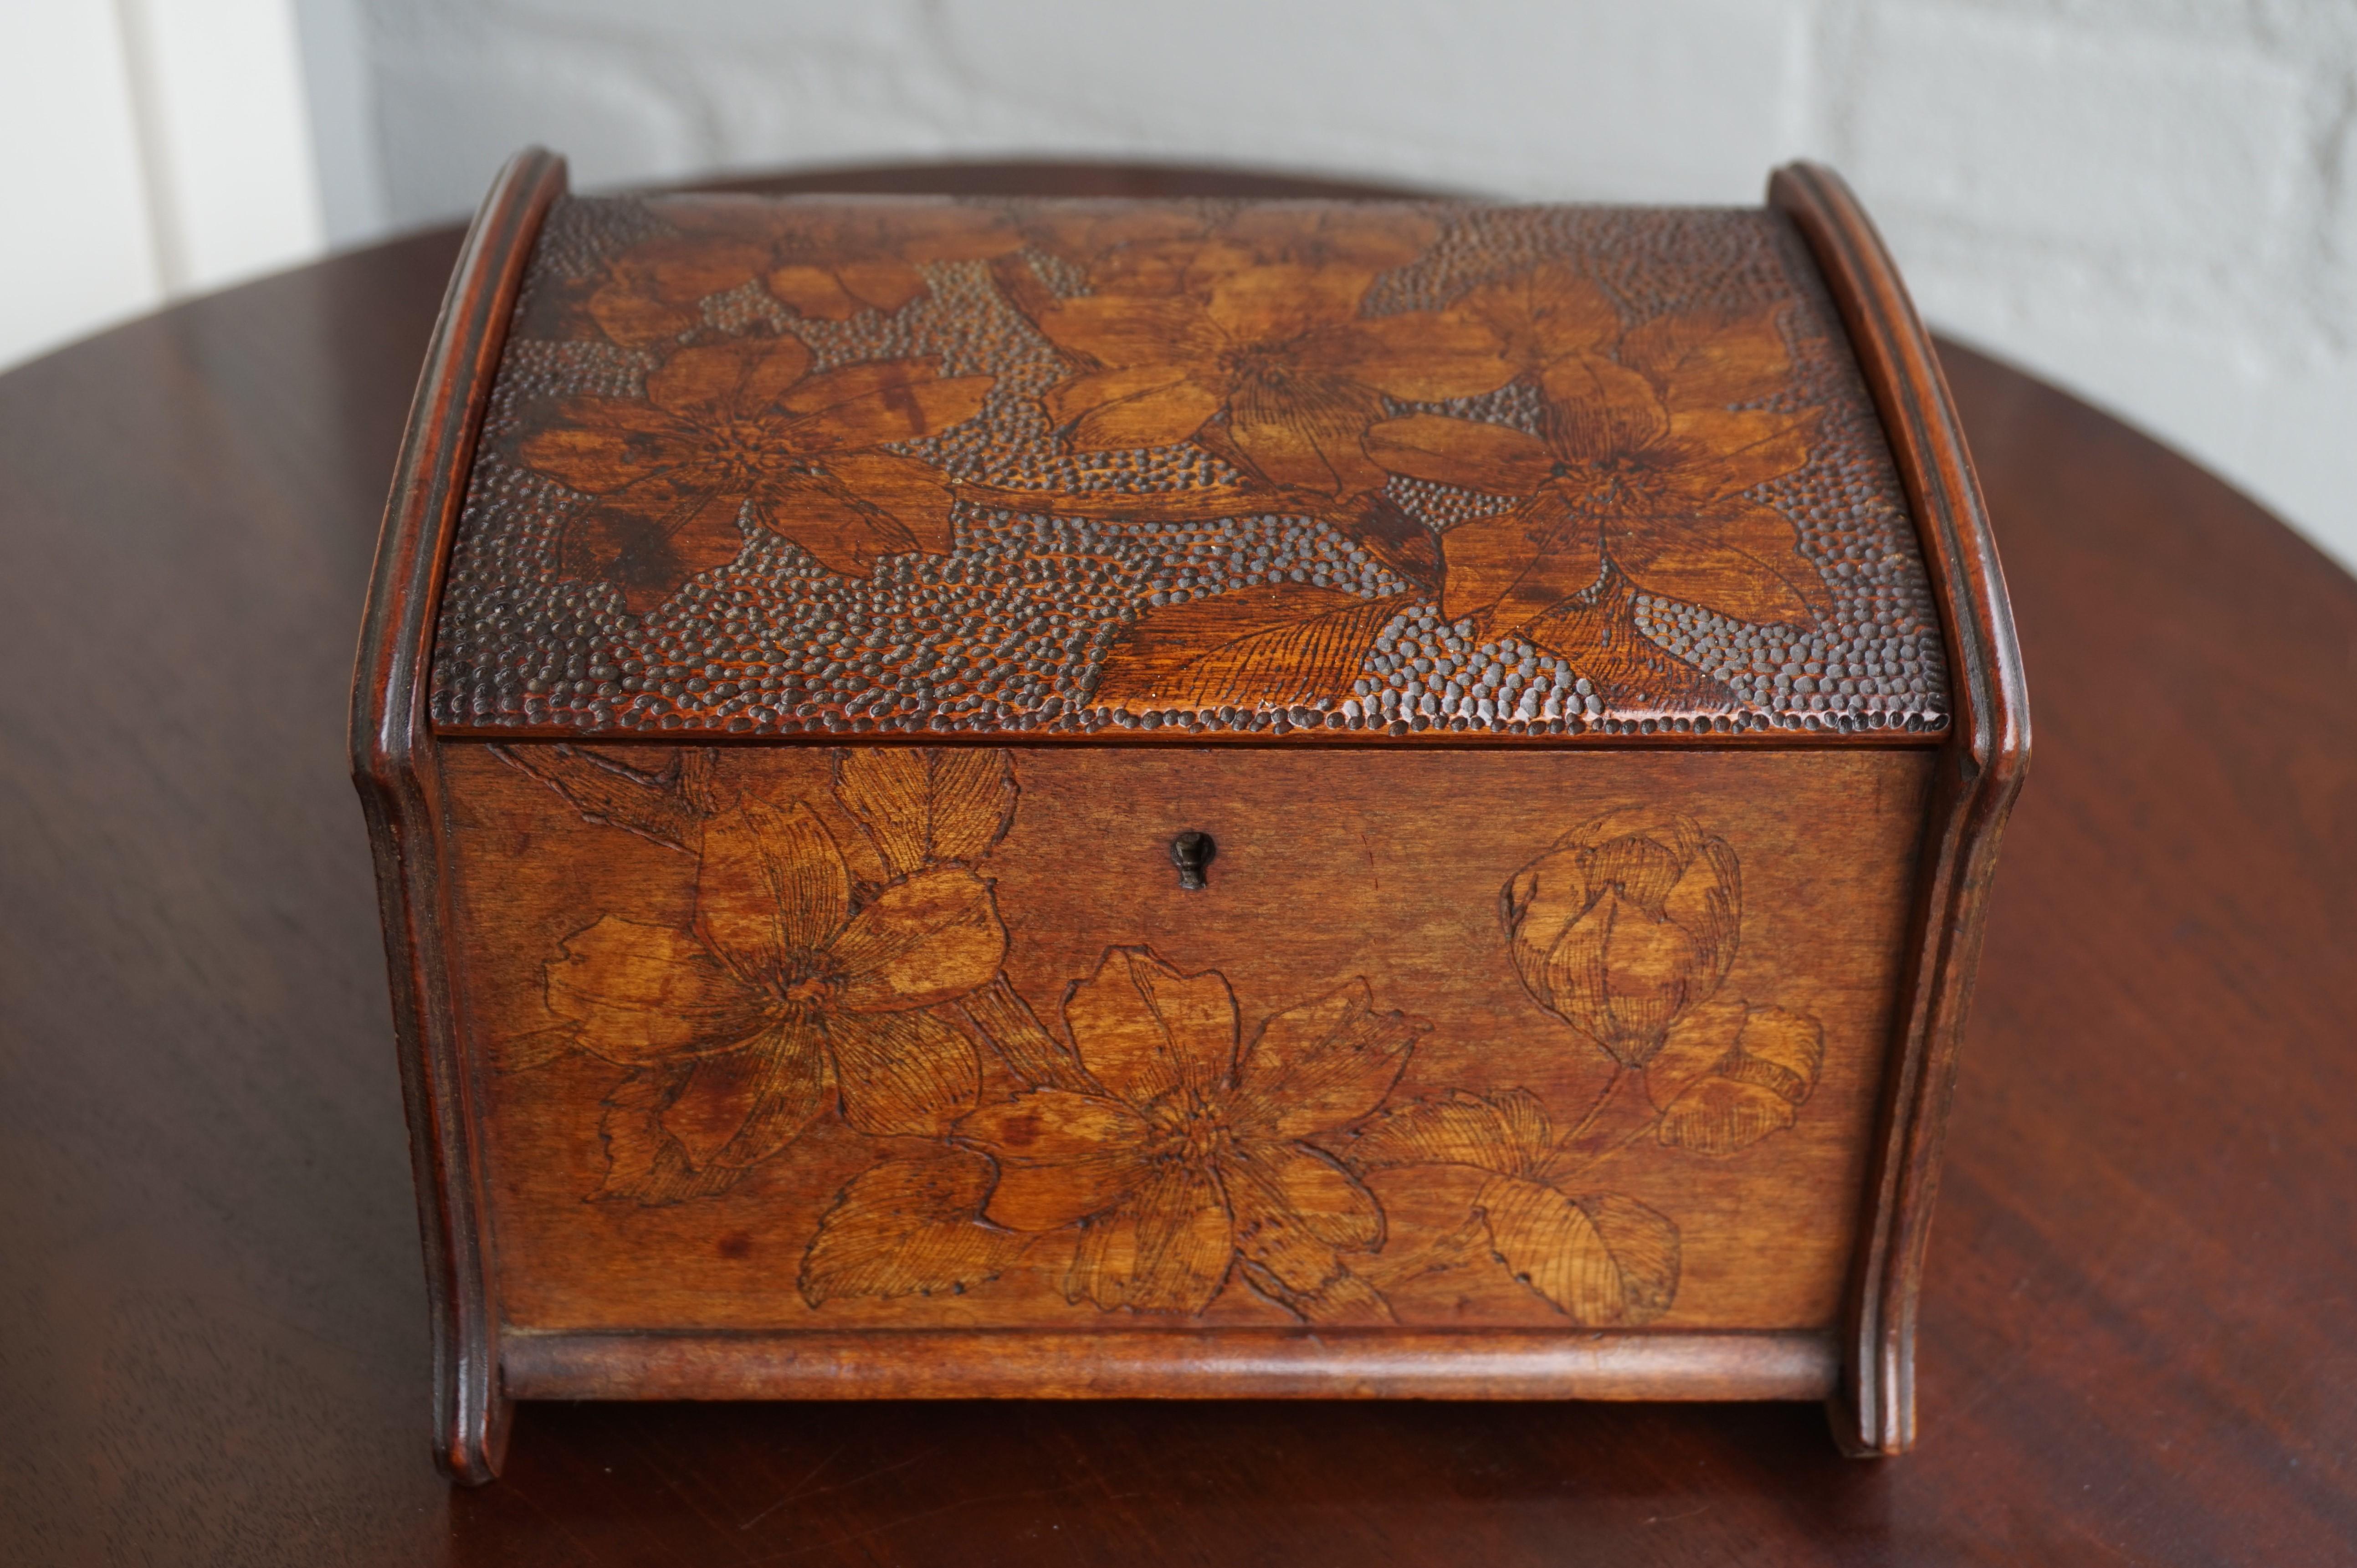 Arts and Crafts Stunning Arts & Crafts Box with Finest Hand Carved Flower Patterns in Bas Relief